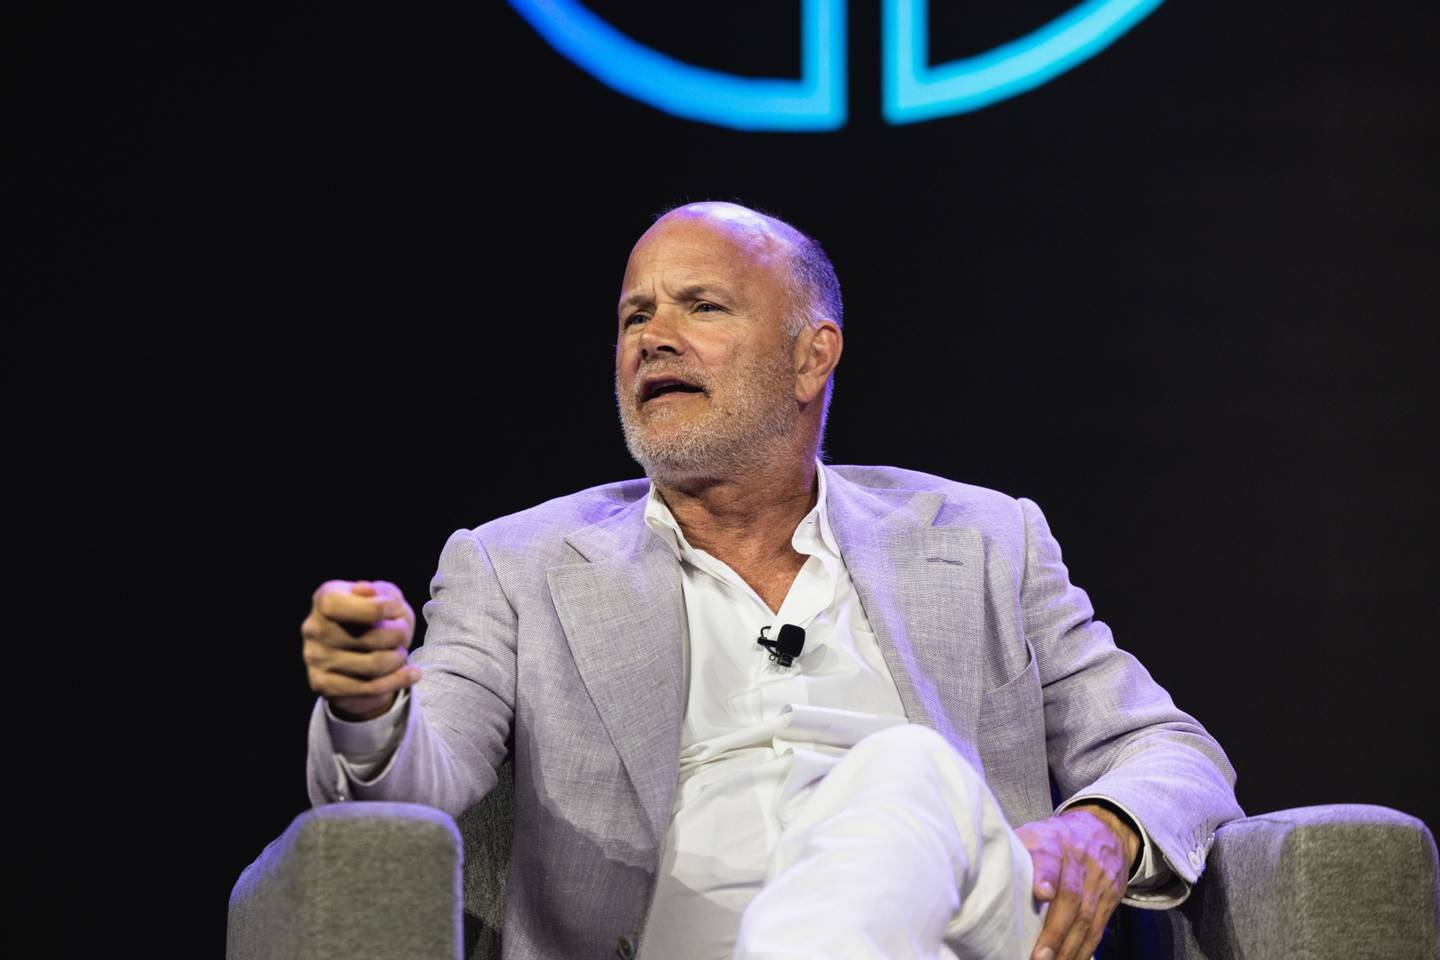 Mike Novogratz, founder and chief executive of Galaxy Digital, says the crisis of confidence in cryptocurrencies will drive people to put their money in trusted custodians. Bloomberg